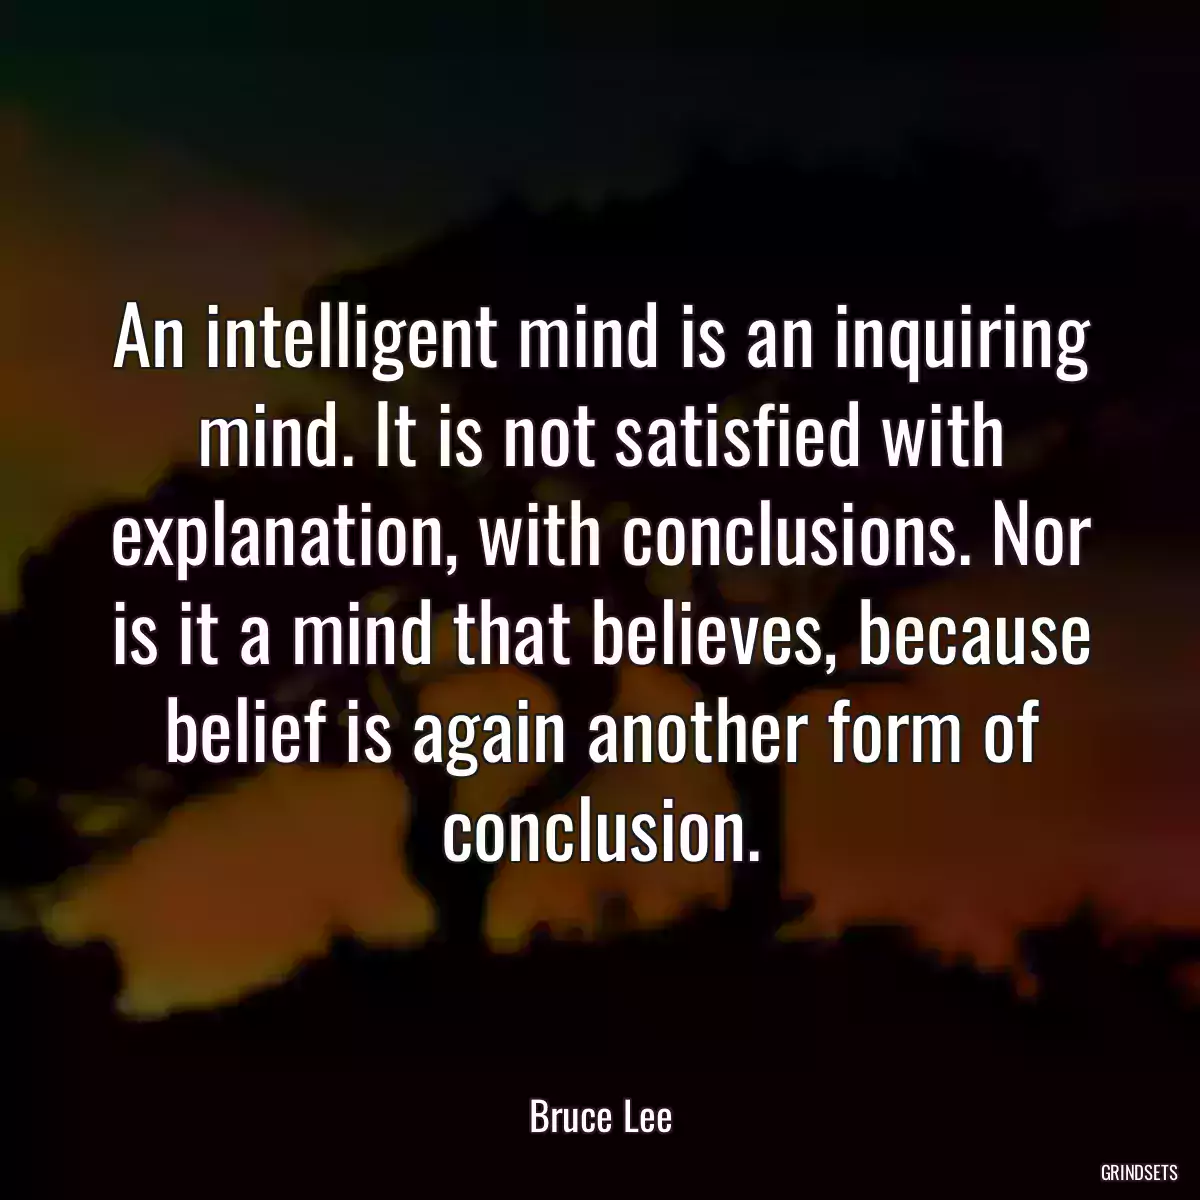 An intelligent mind is an inquiring mind. It is not satisfied with explanation, with conclusions. Nor is it a mind that believes, because belief is again another form of conclusion.